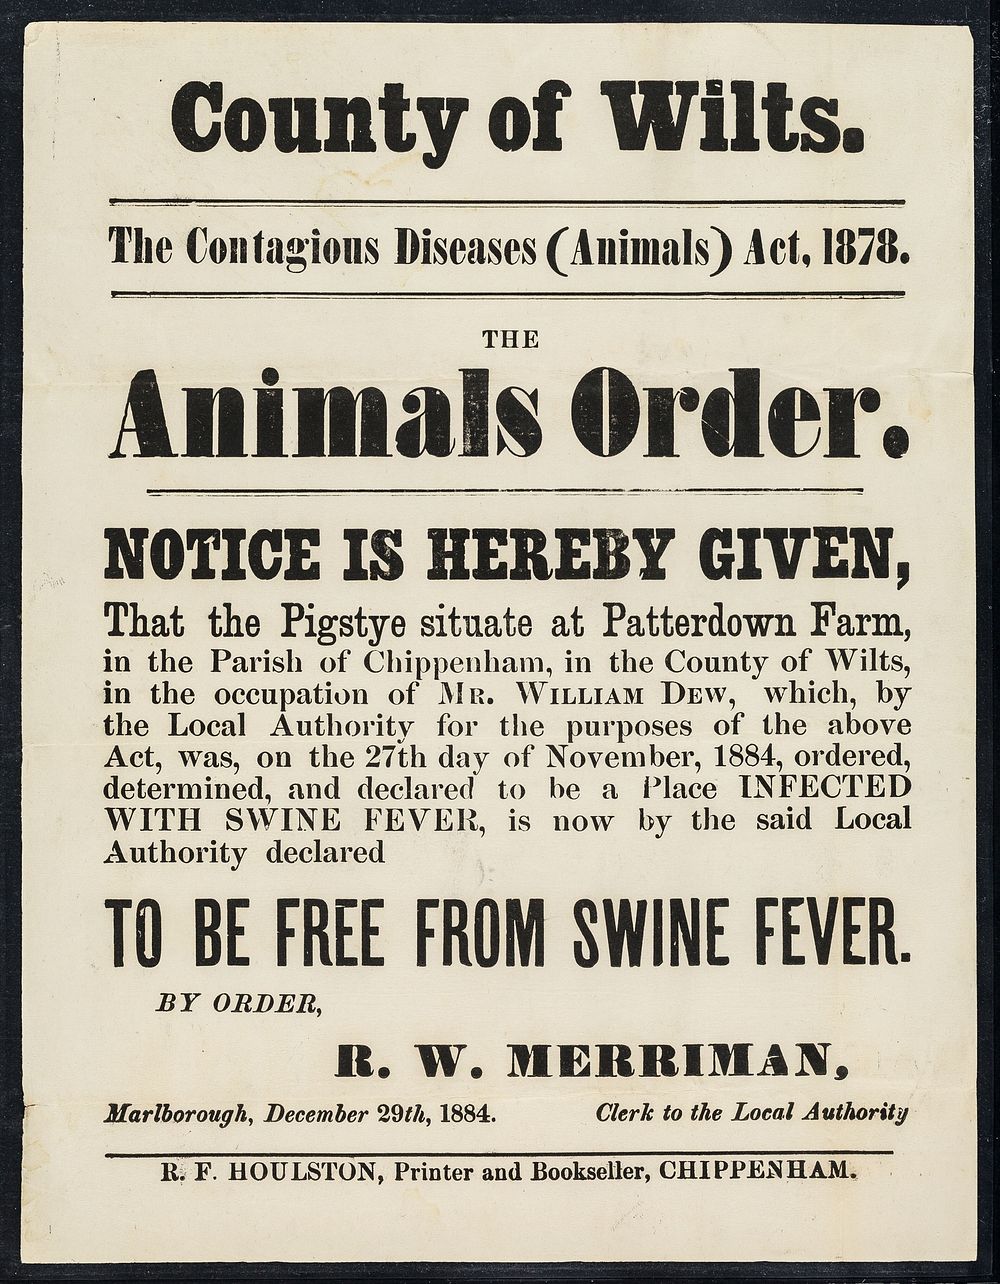 County of Wilts. : the contagious diseases (animals) act, 1878 : the animals order : notice is hereby given that the pigstye…